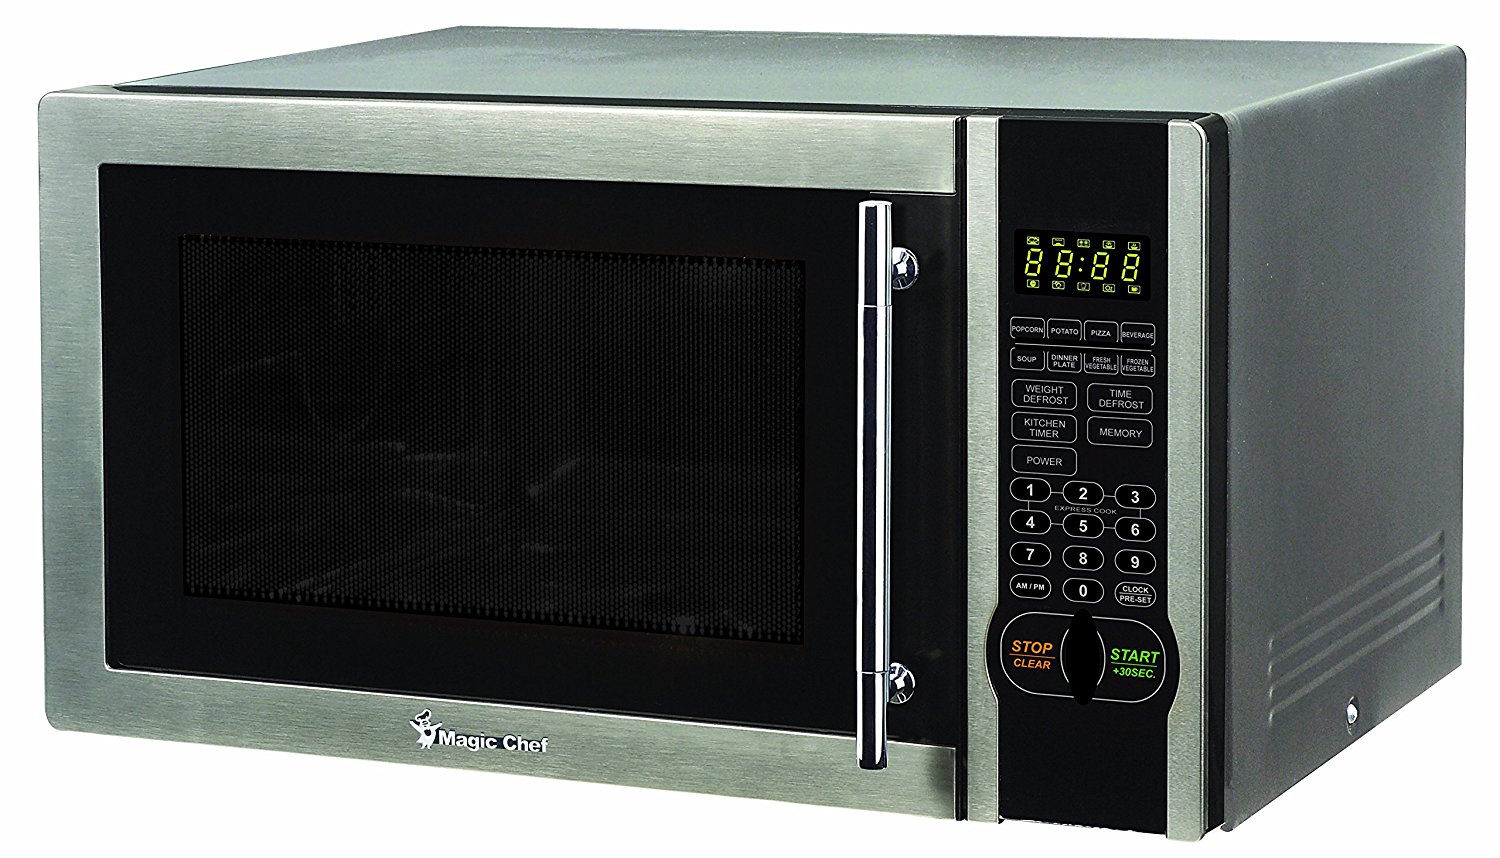 Magic Chef Mcm1110St 1.1 Cubic Feet 1000-Watt Stainless Microwave with Digital Touch